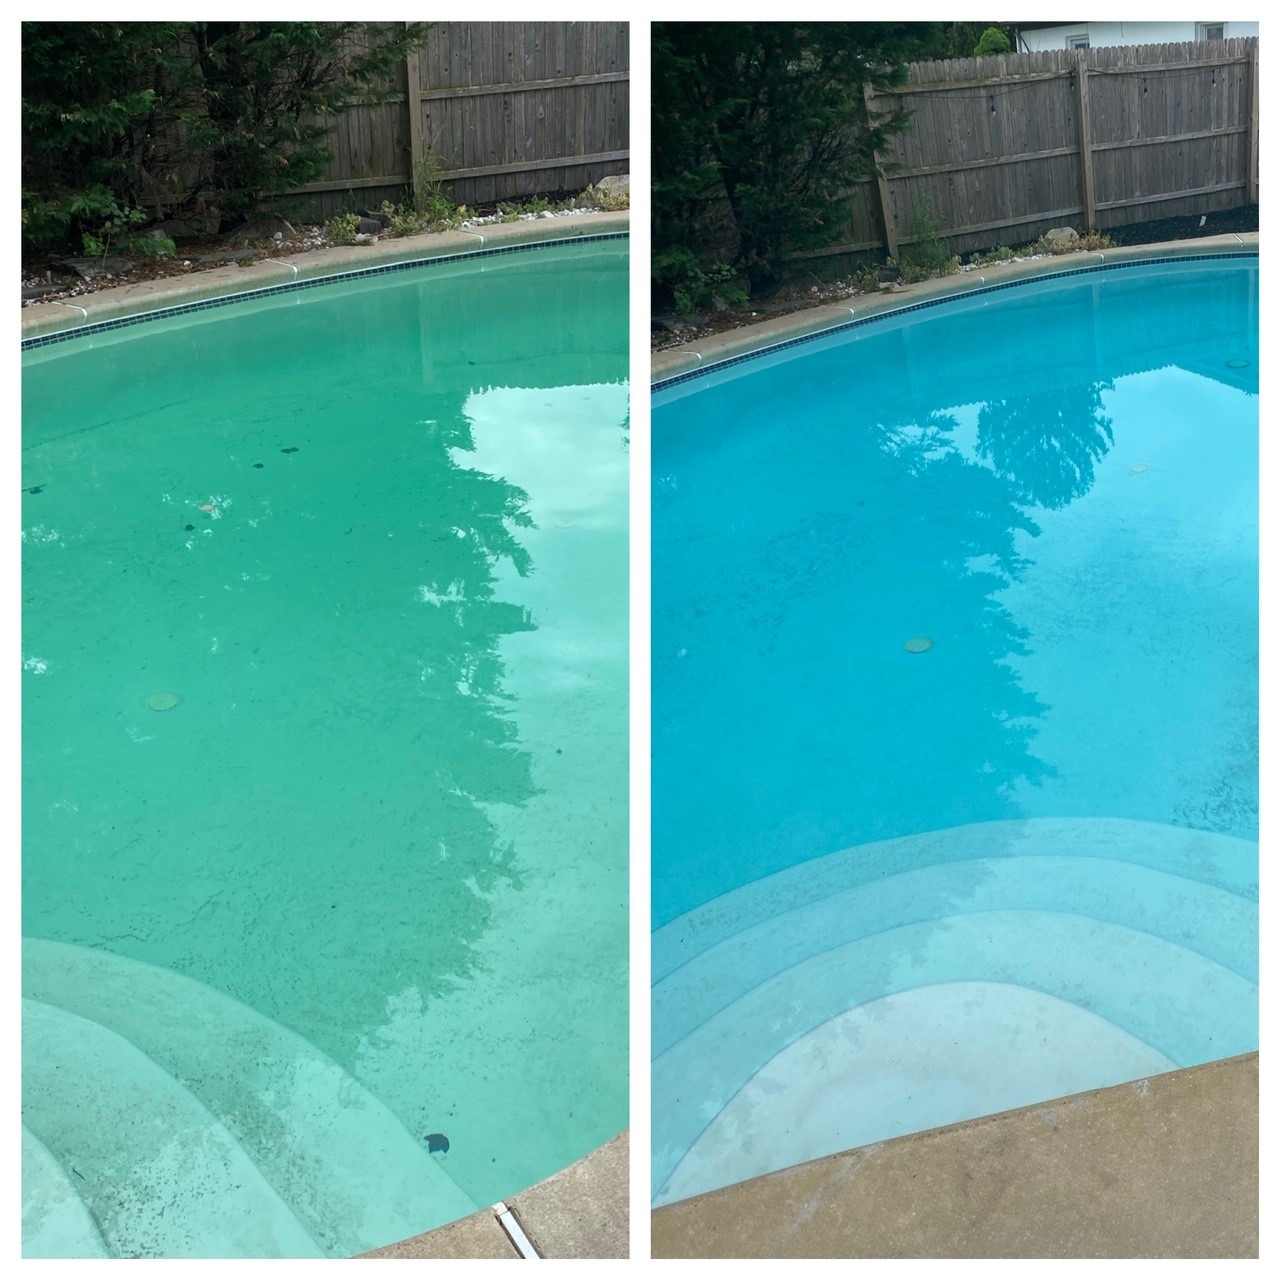 Pool before and after SLAM 29 May 2020.jpg